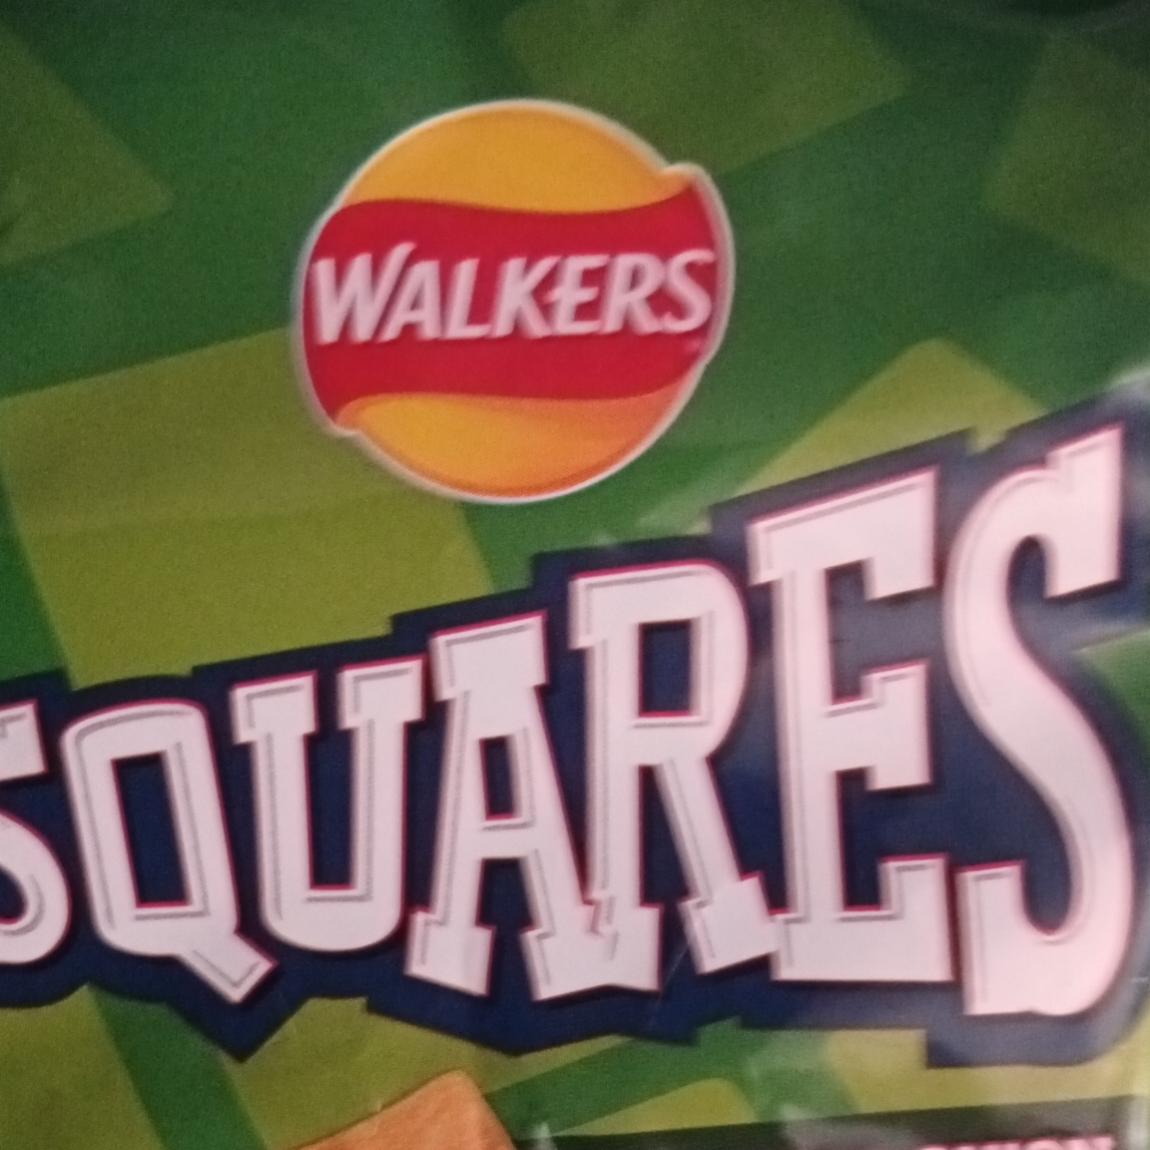 Zdjęcia - Square cheese and onion Walkers